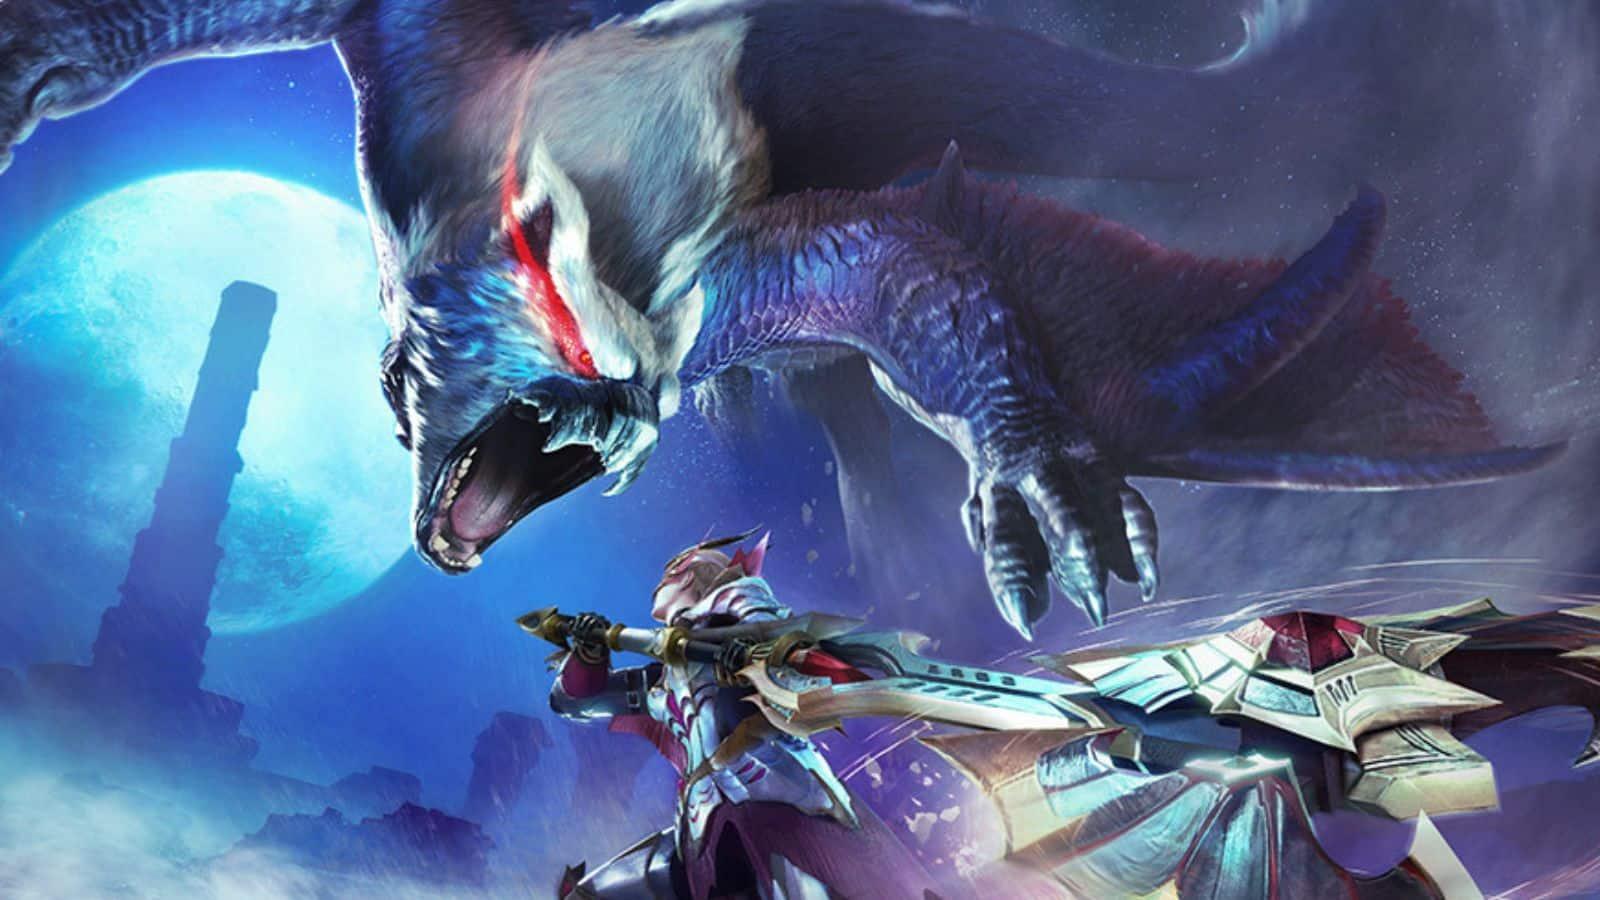 Monster Hunter Rise: Sunbreak Demo Out Tomorrow, New Monsters And Areas  Announced - Game Informer